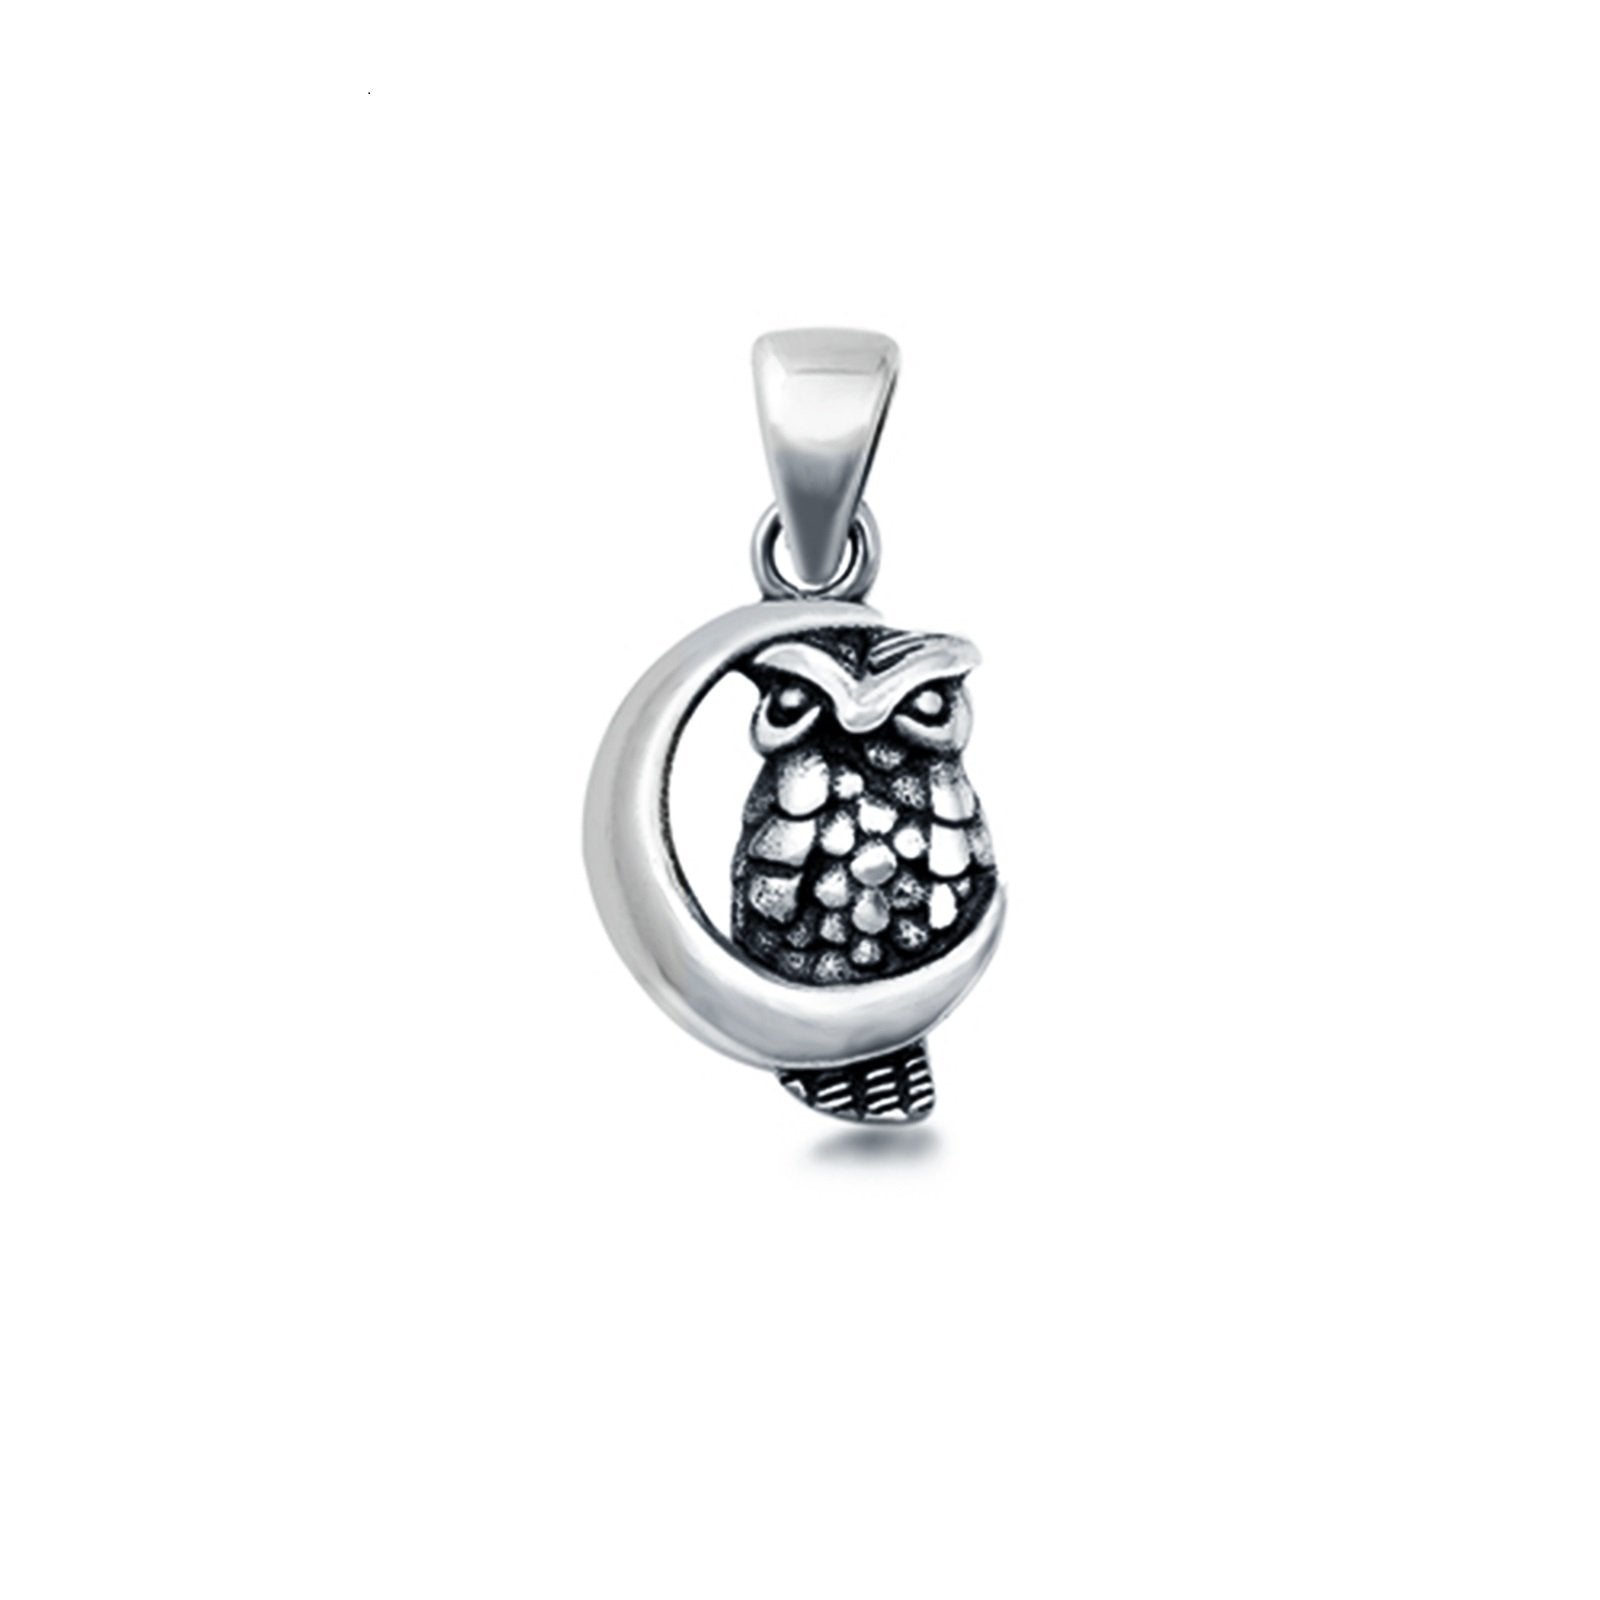 Owl & Moon Charm Pendant Round 925 Sterling Silver